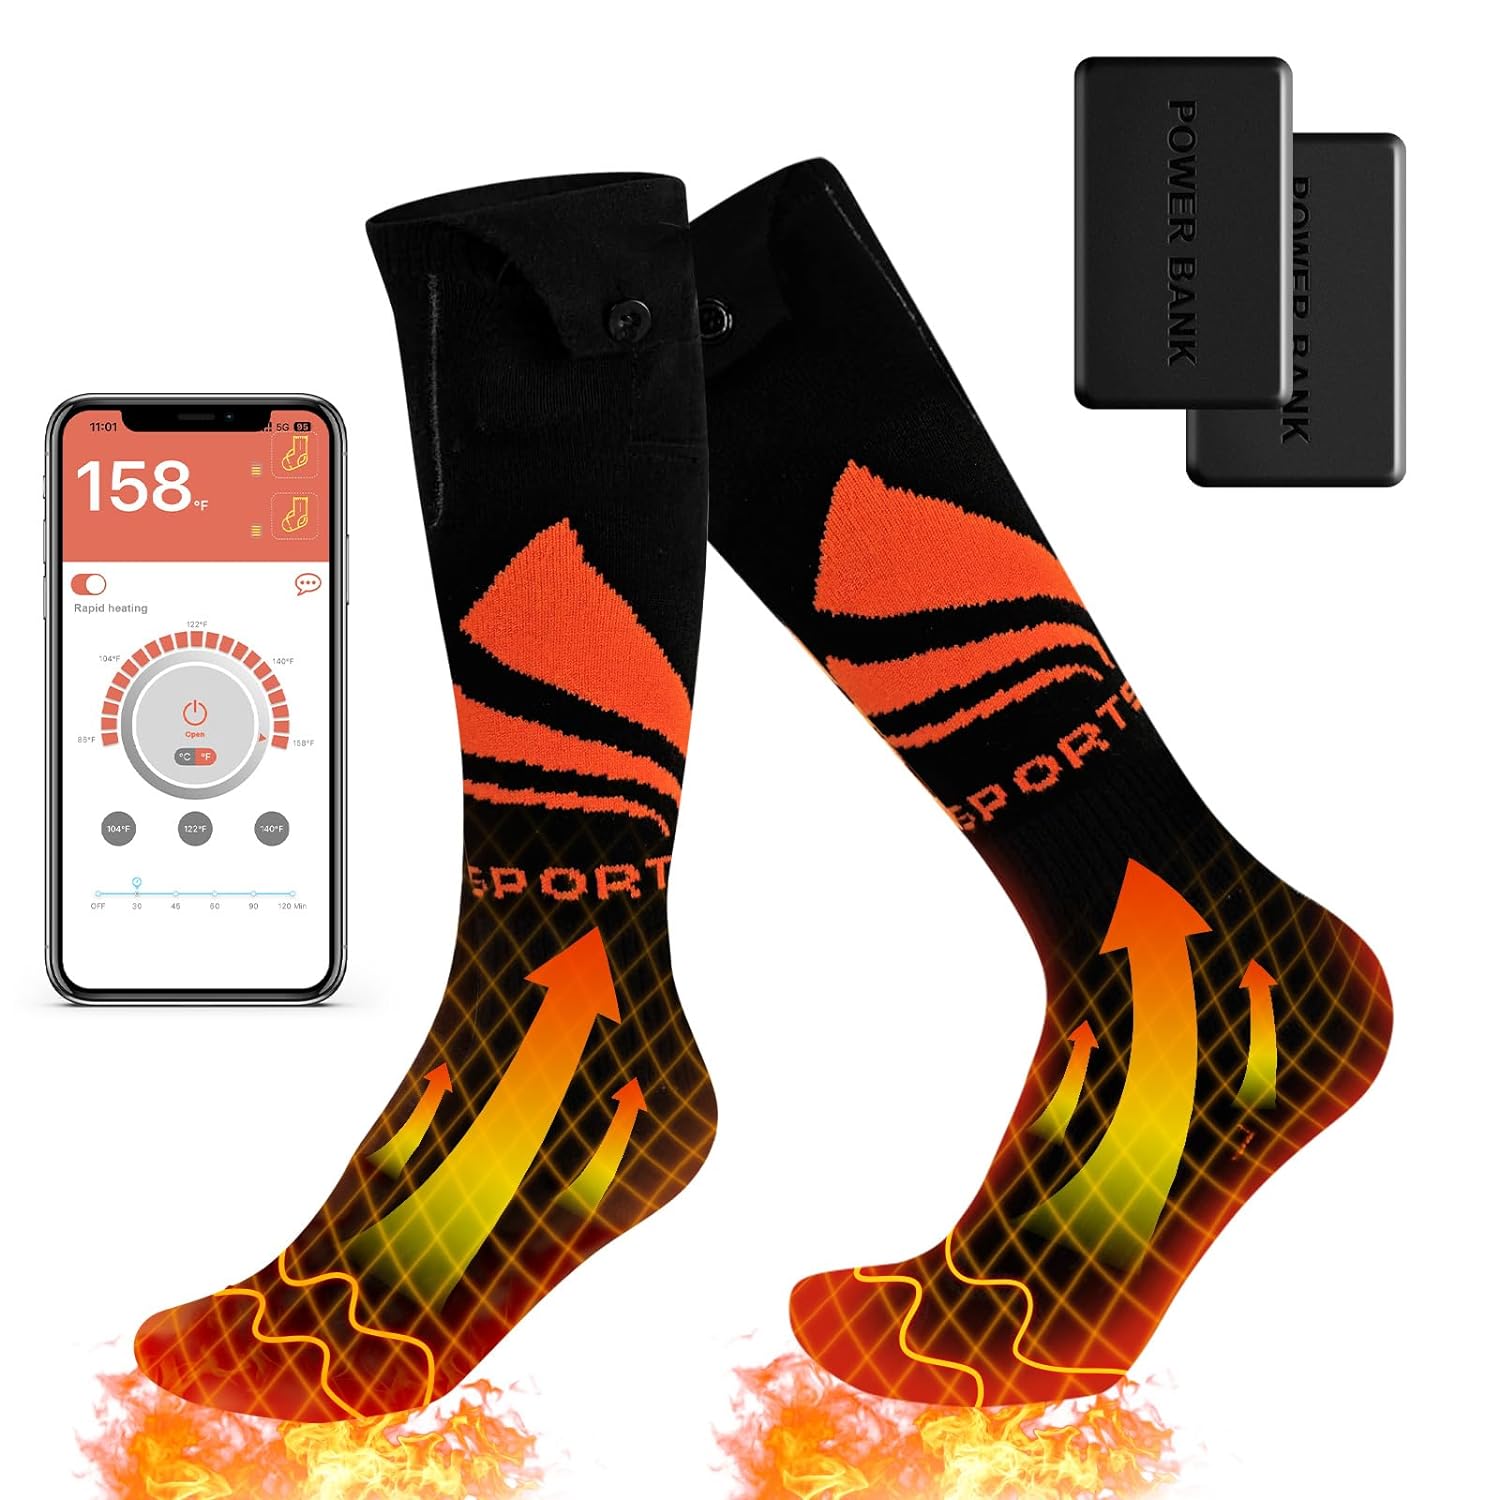 Heated Socks for Men Women,5V/5000mAh Rechargeable Washable Battery Heating Socks with 4 Heating Modes APP Control,Electric Foot Warmer Thermal Socks for Hunting Camping Skiing Sports Outdoors